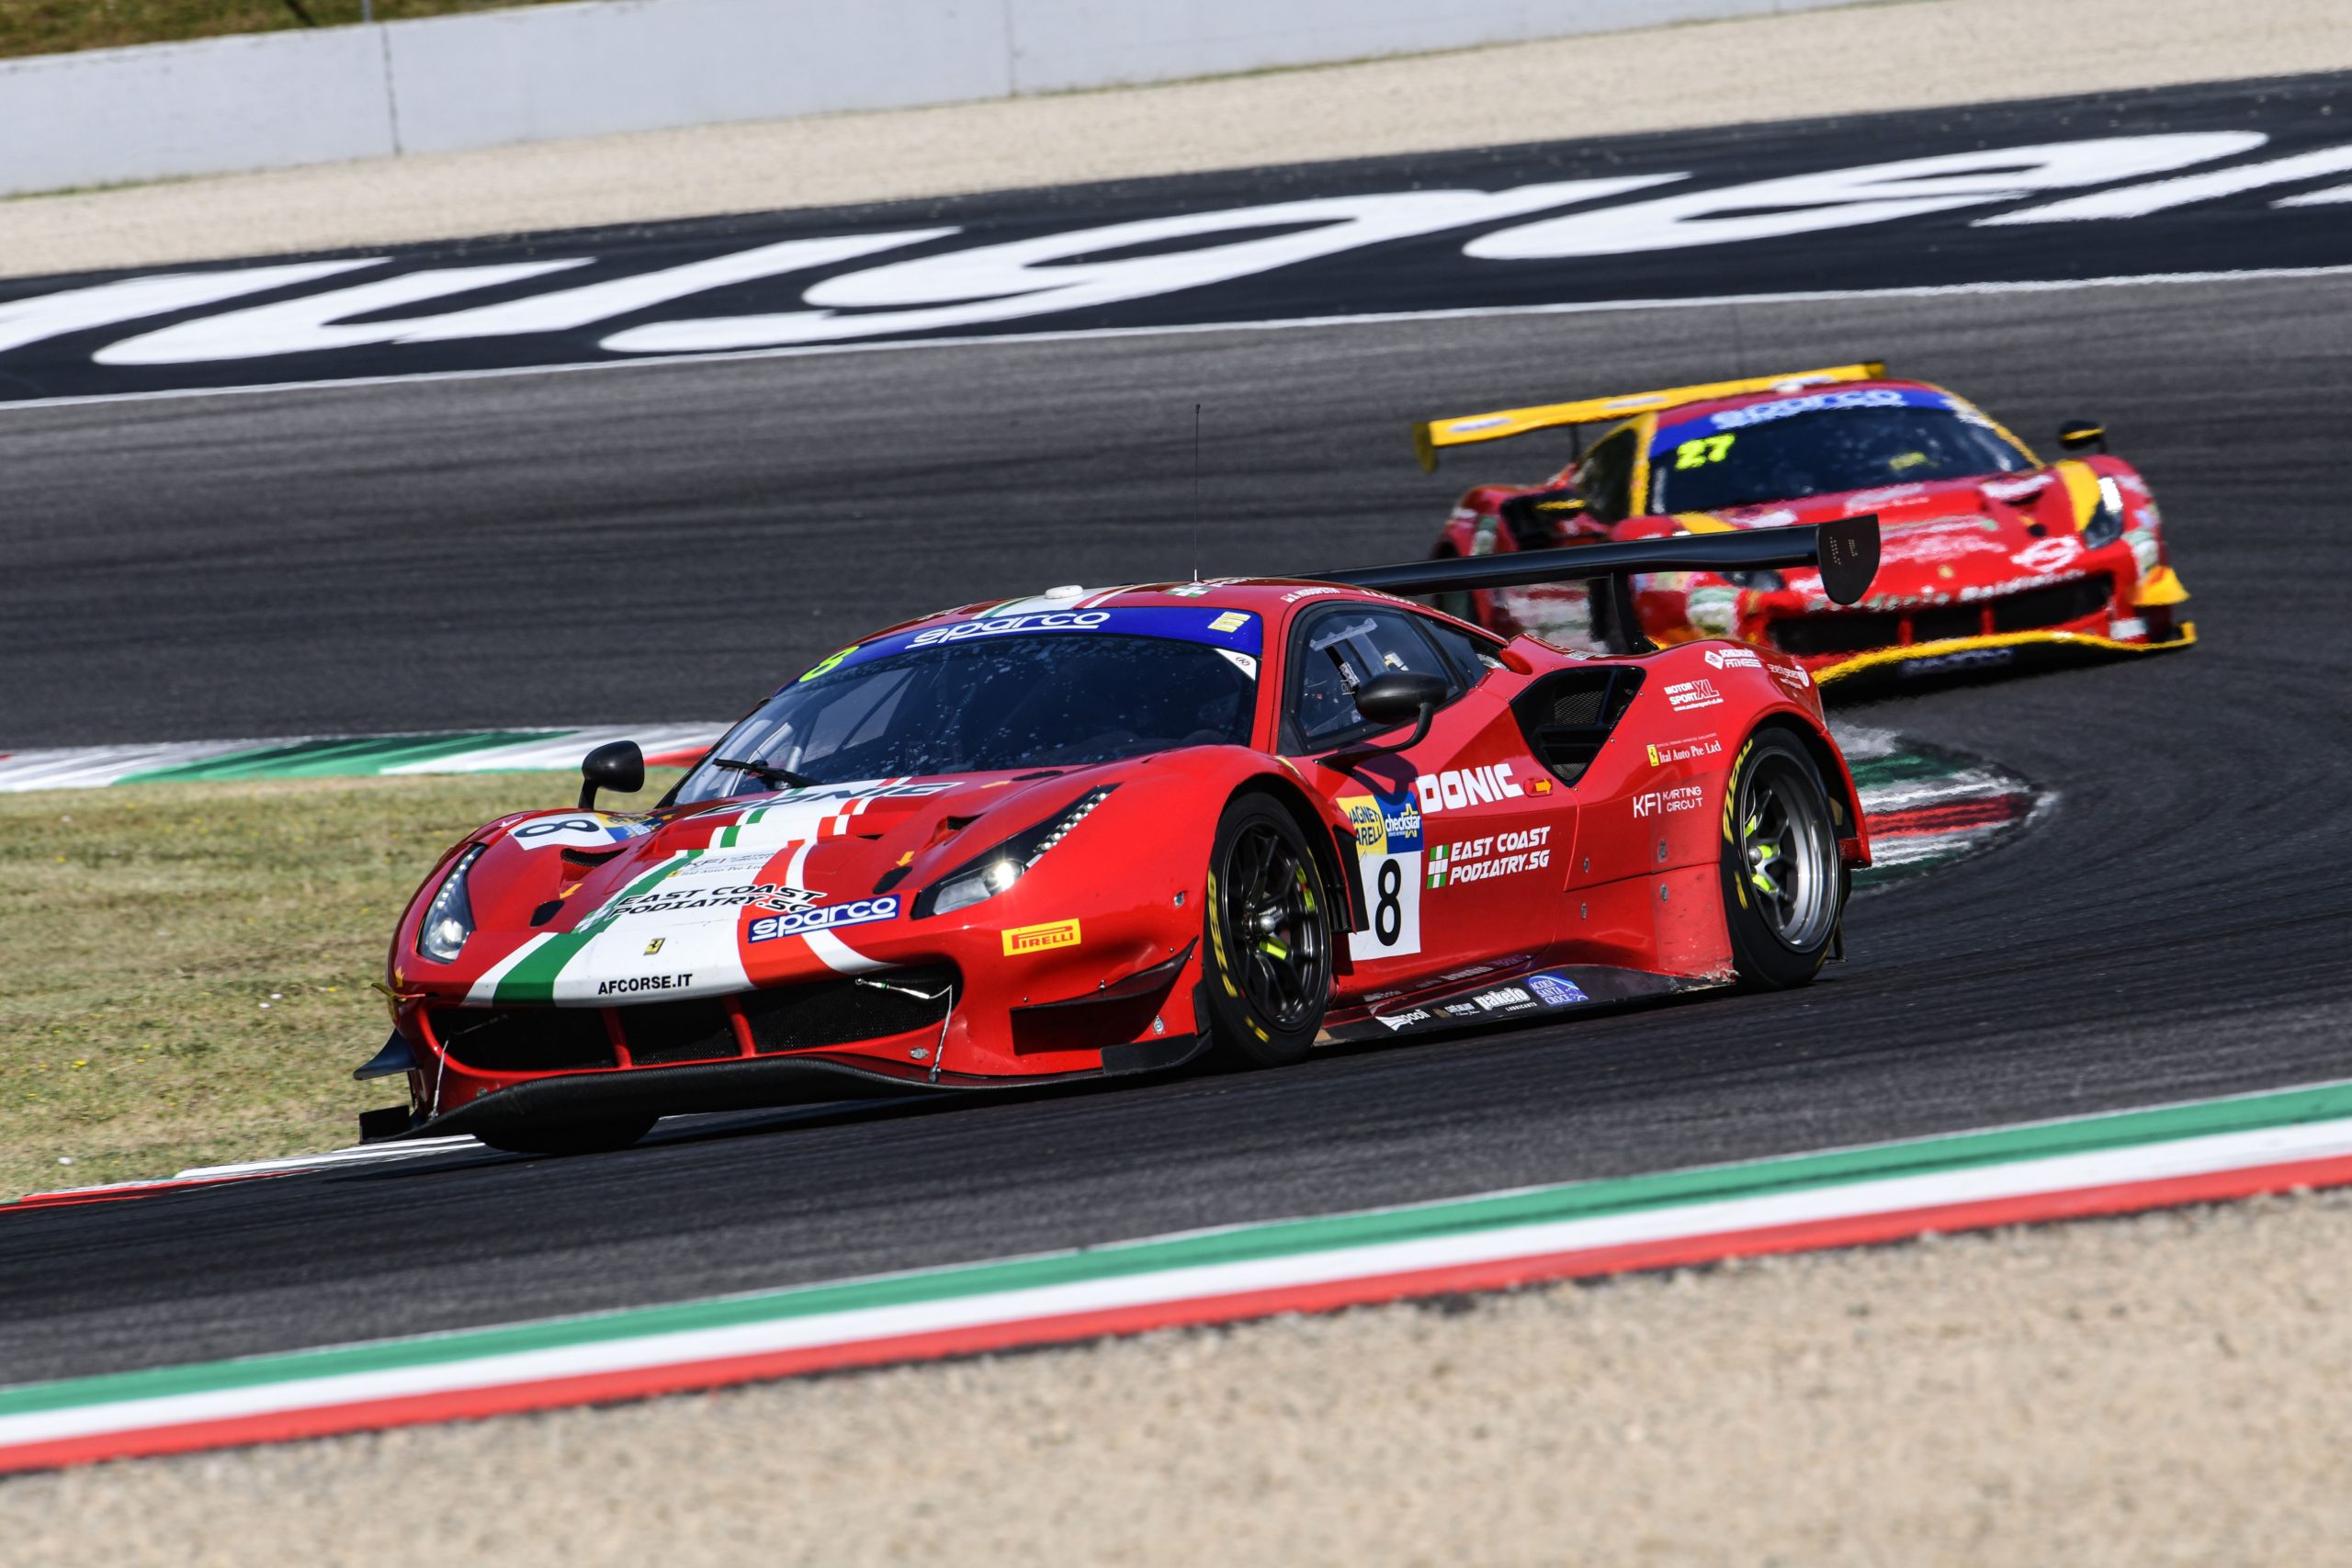 Mugello Round 4 – Post Race Review